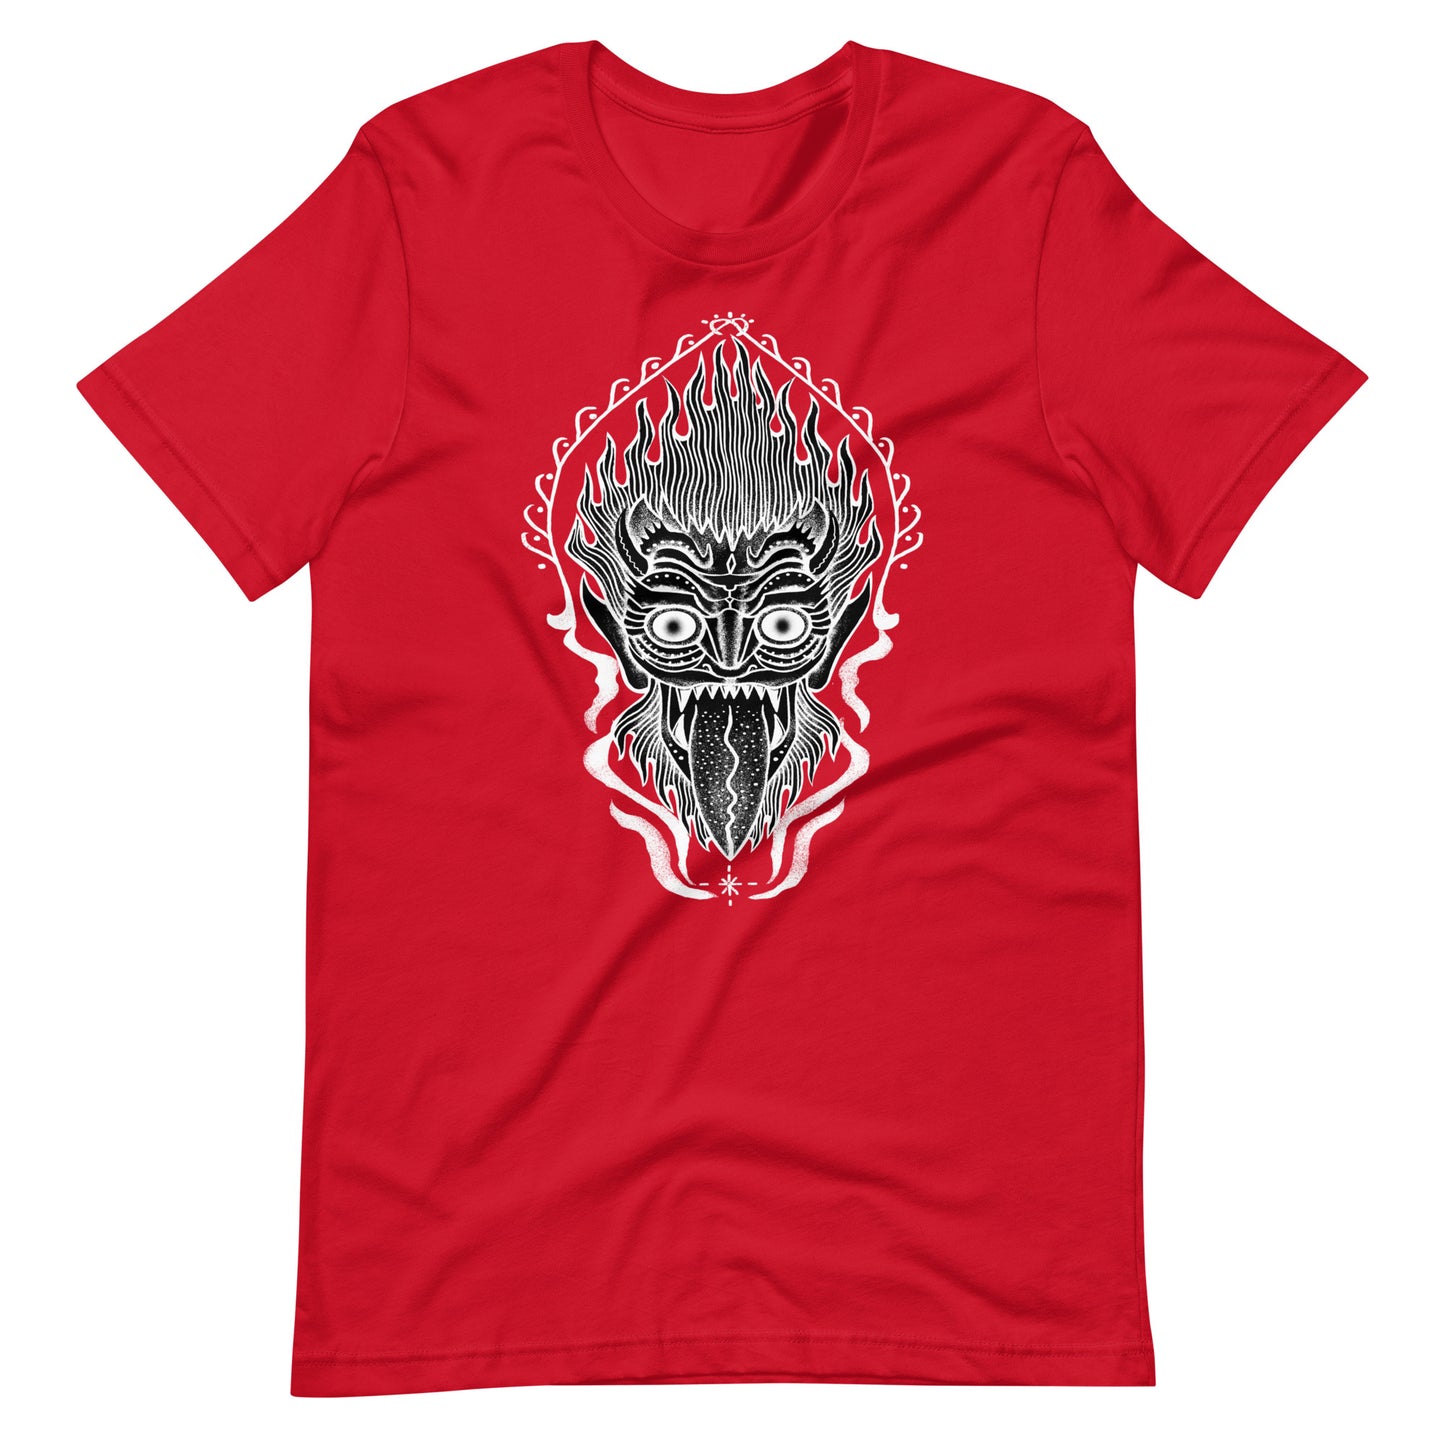 King of Fire - Men's t-shirt - Red Front